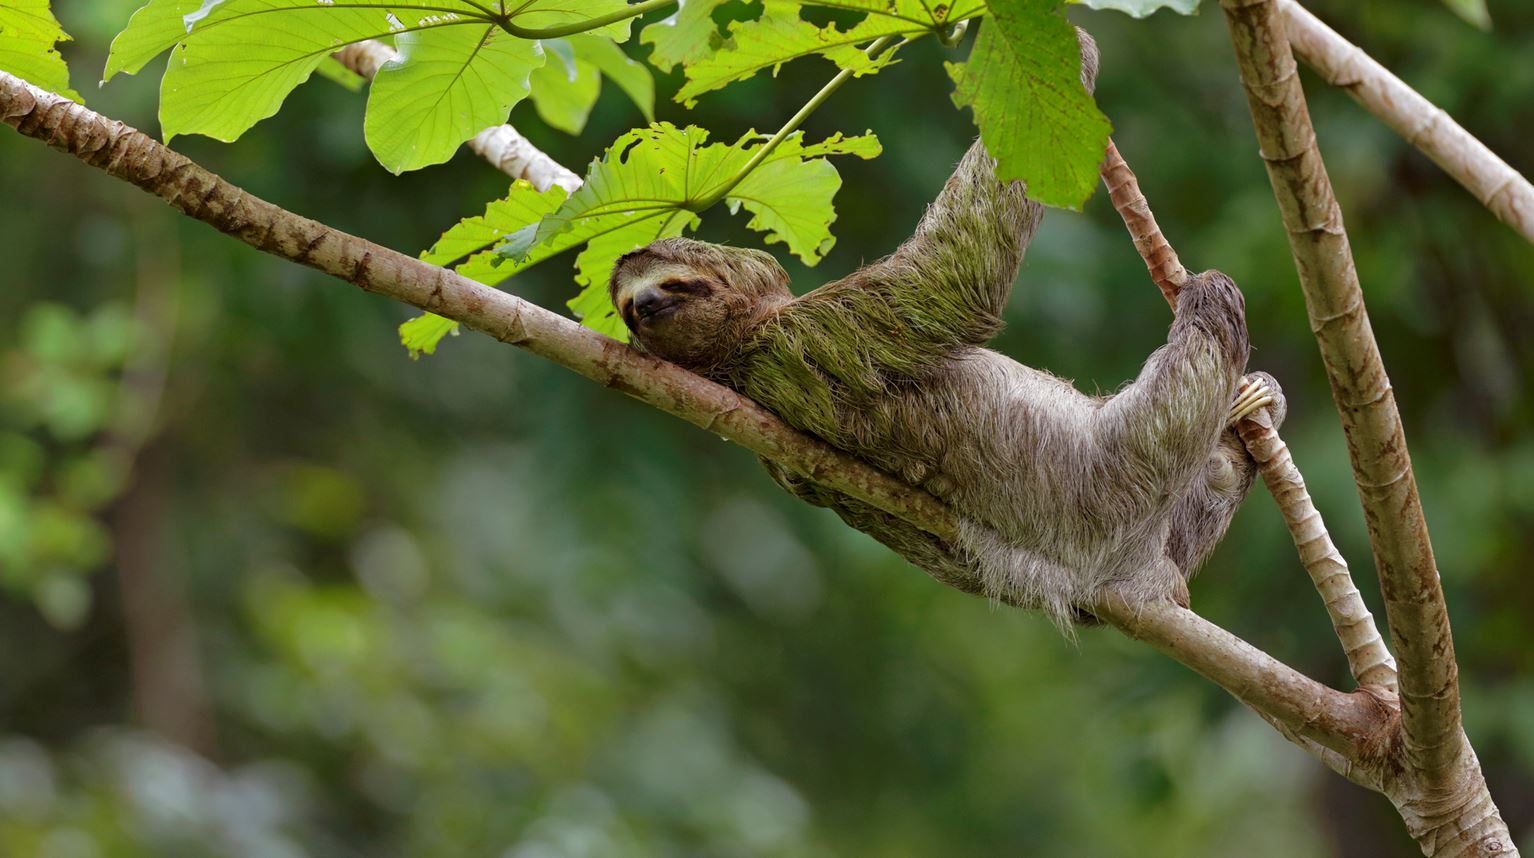 Sloth on cecropia tree in a forest of Costa Rica.